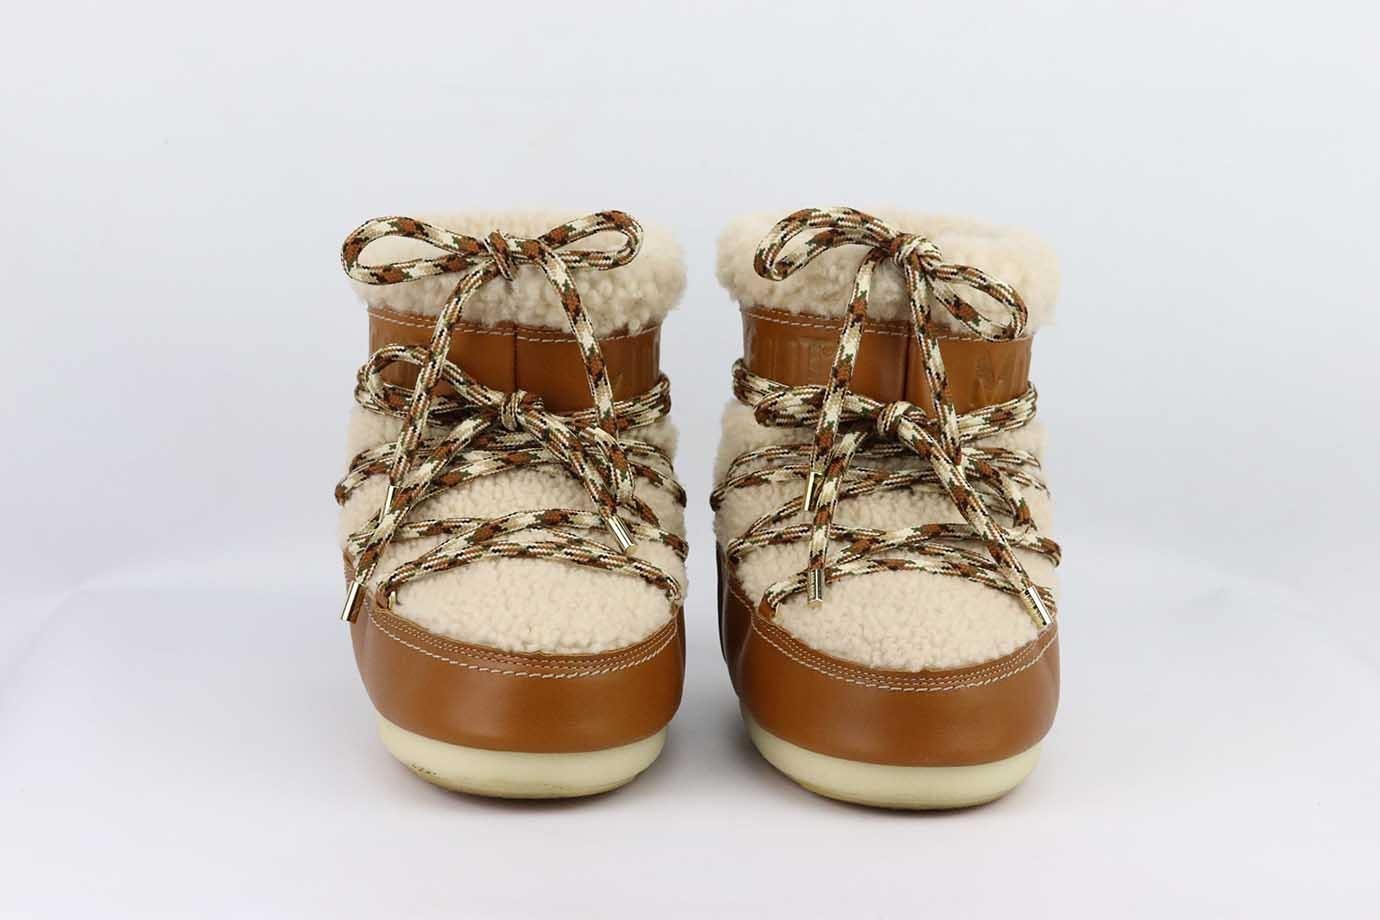 Chloé + Moon Boot shearling and leather snow boots. Shearling and leather snow boots with rope lace up detail around the front and shearling lined. Tan and cream Rounded toes. Ankle length. Platform heel. Pull on. Comes with box and dustbag. Size: